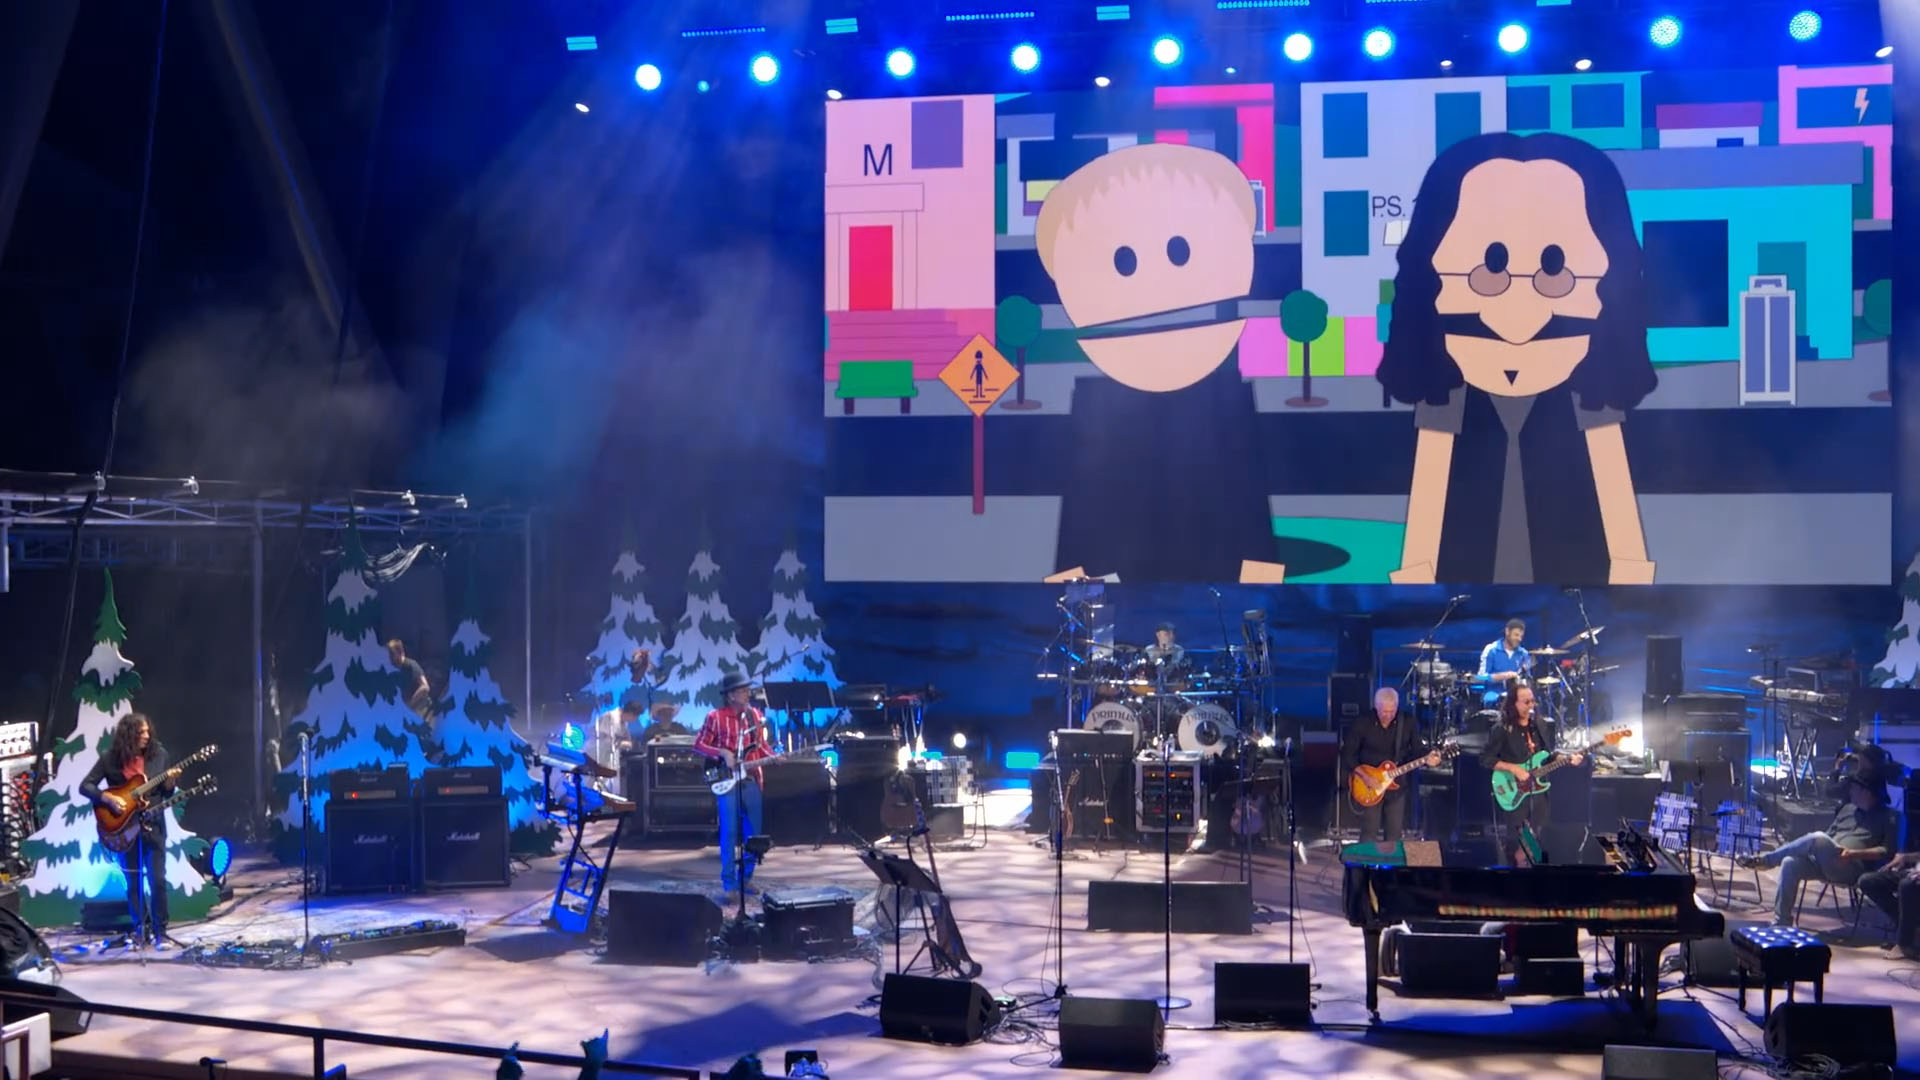 South Park 25th Anniversary Concert Photos - Geddy Lee and Alex Lifeson Performance - Red Rocks Amphitheatre - Morrison, Colorado - August 10th, 2022